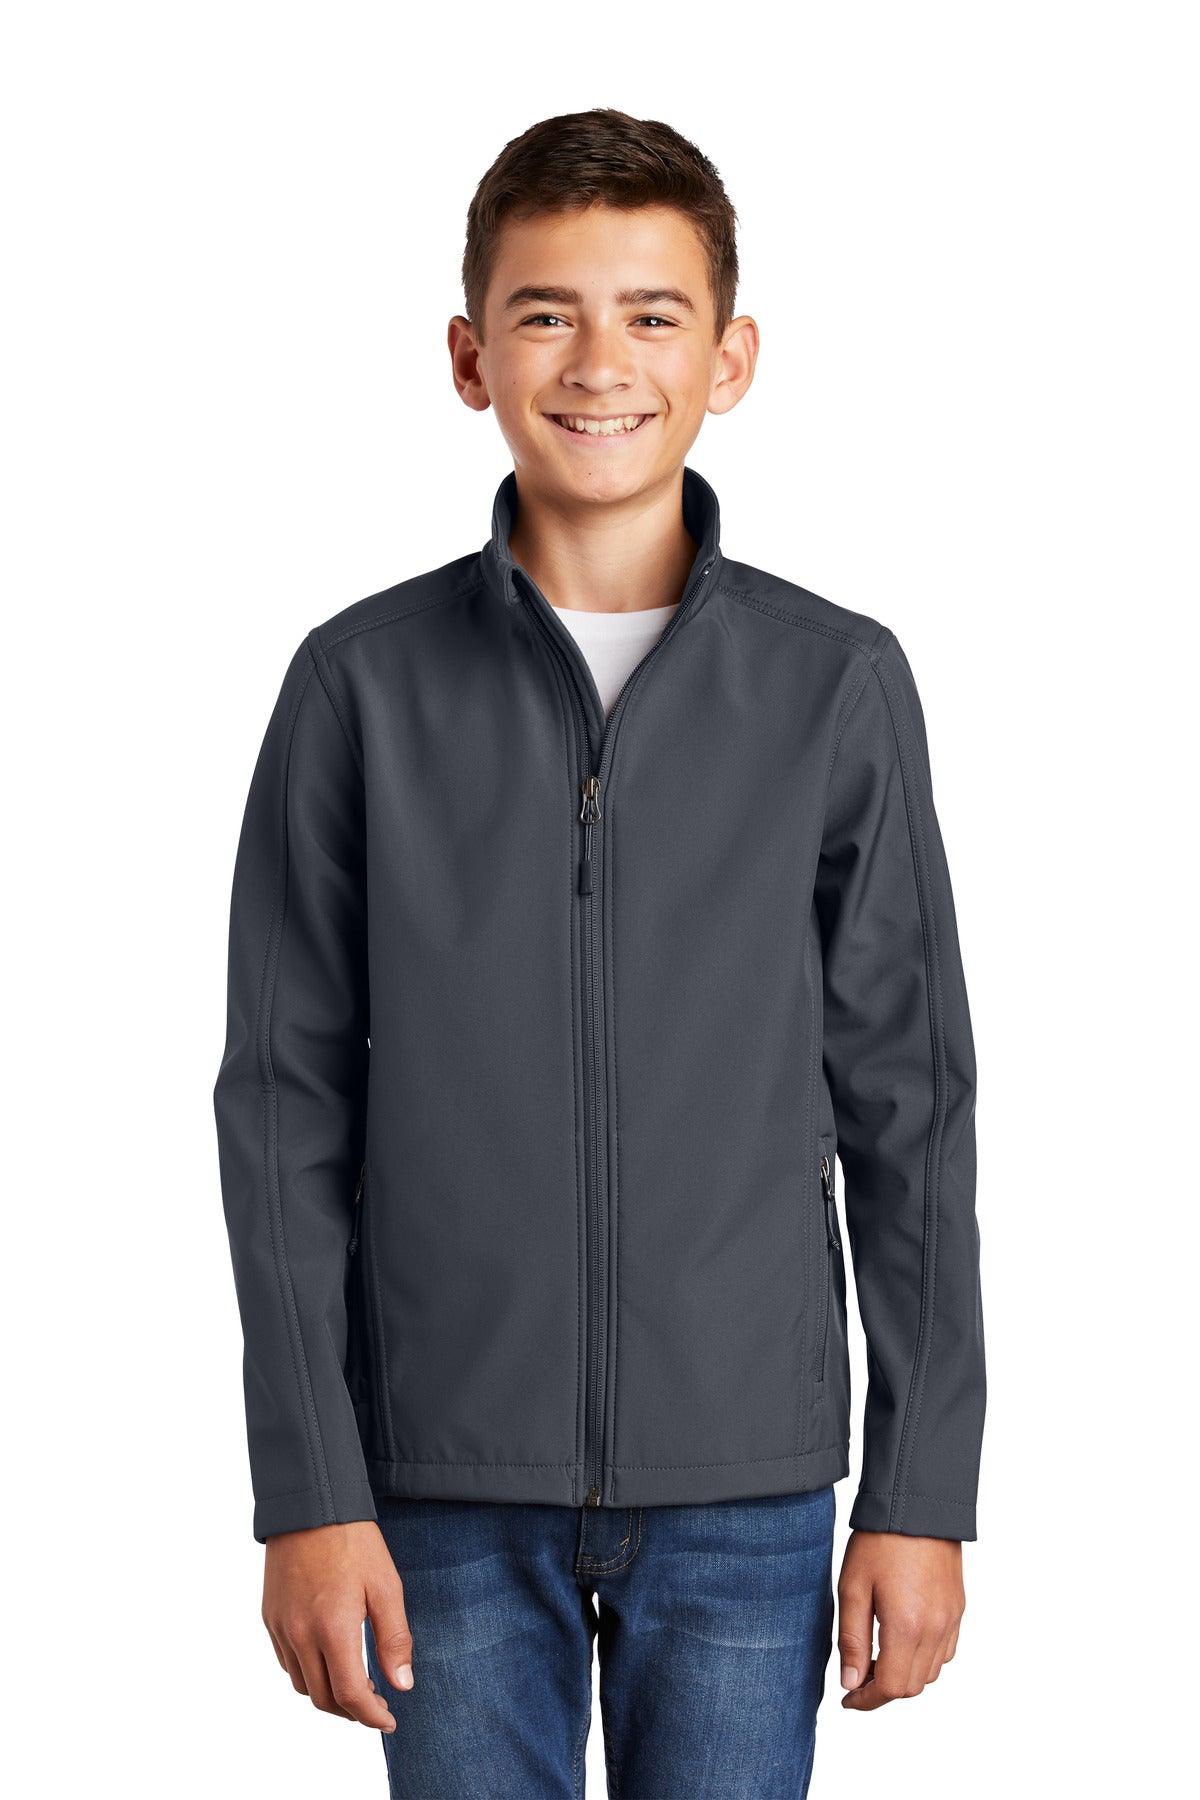 Port Authority Youth Core Soft Shell Jacket. Y317 - Dresses Max